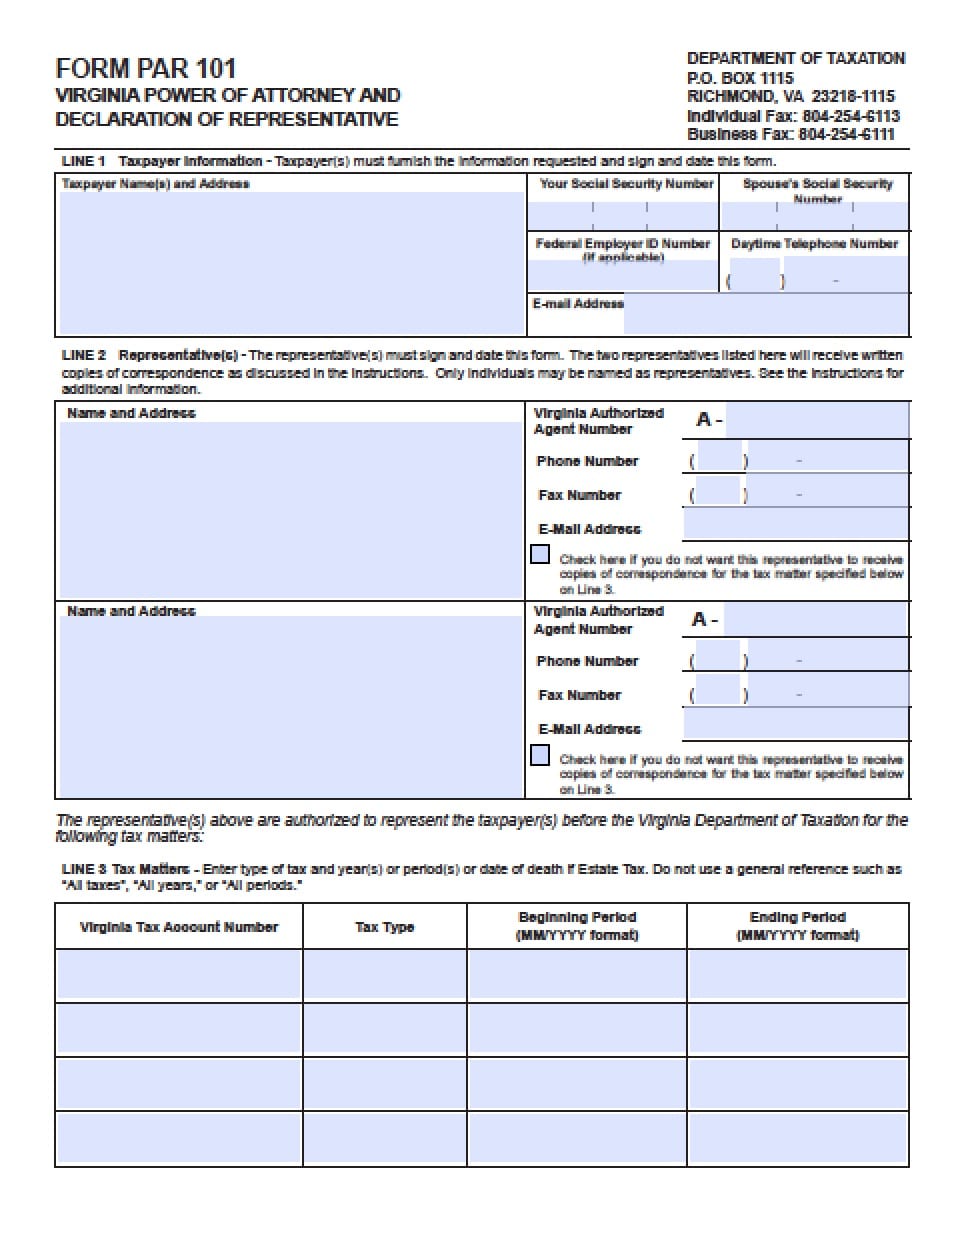 Virginia Tax Power of Attorney Form - Power of Attorney : Power of Attorney